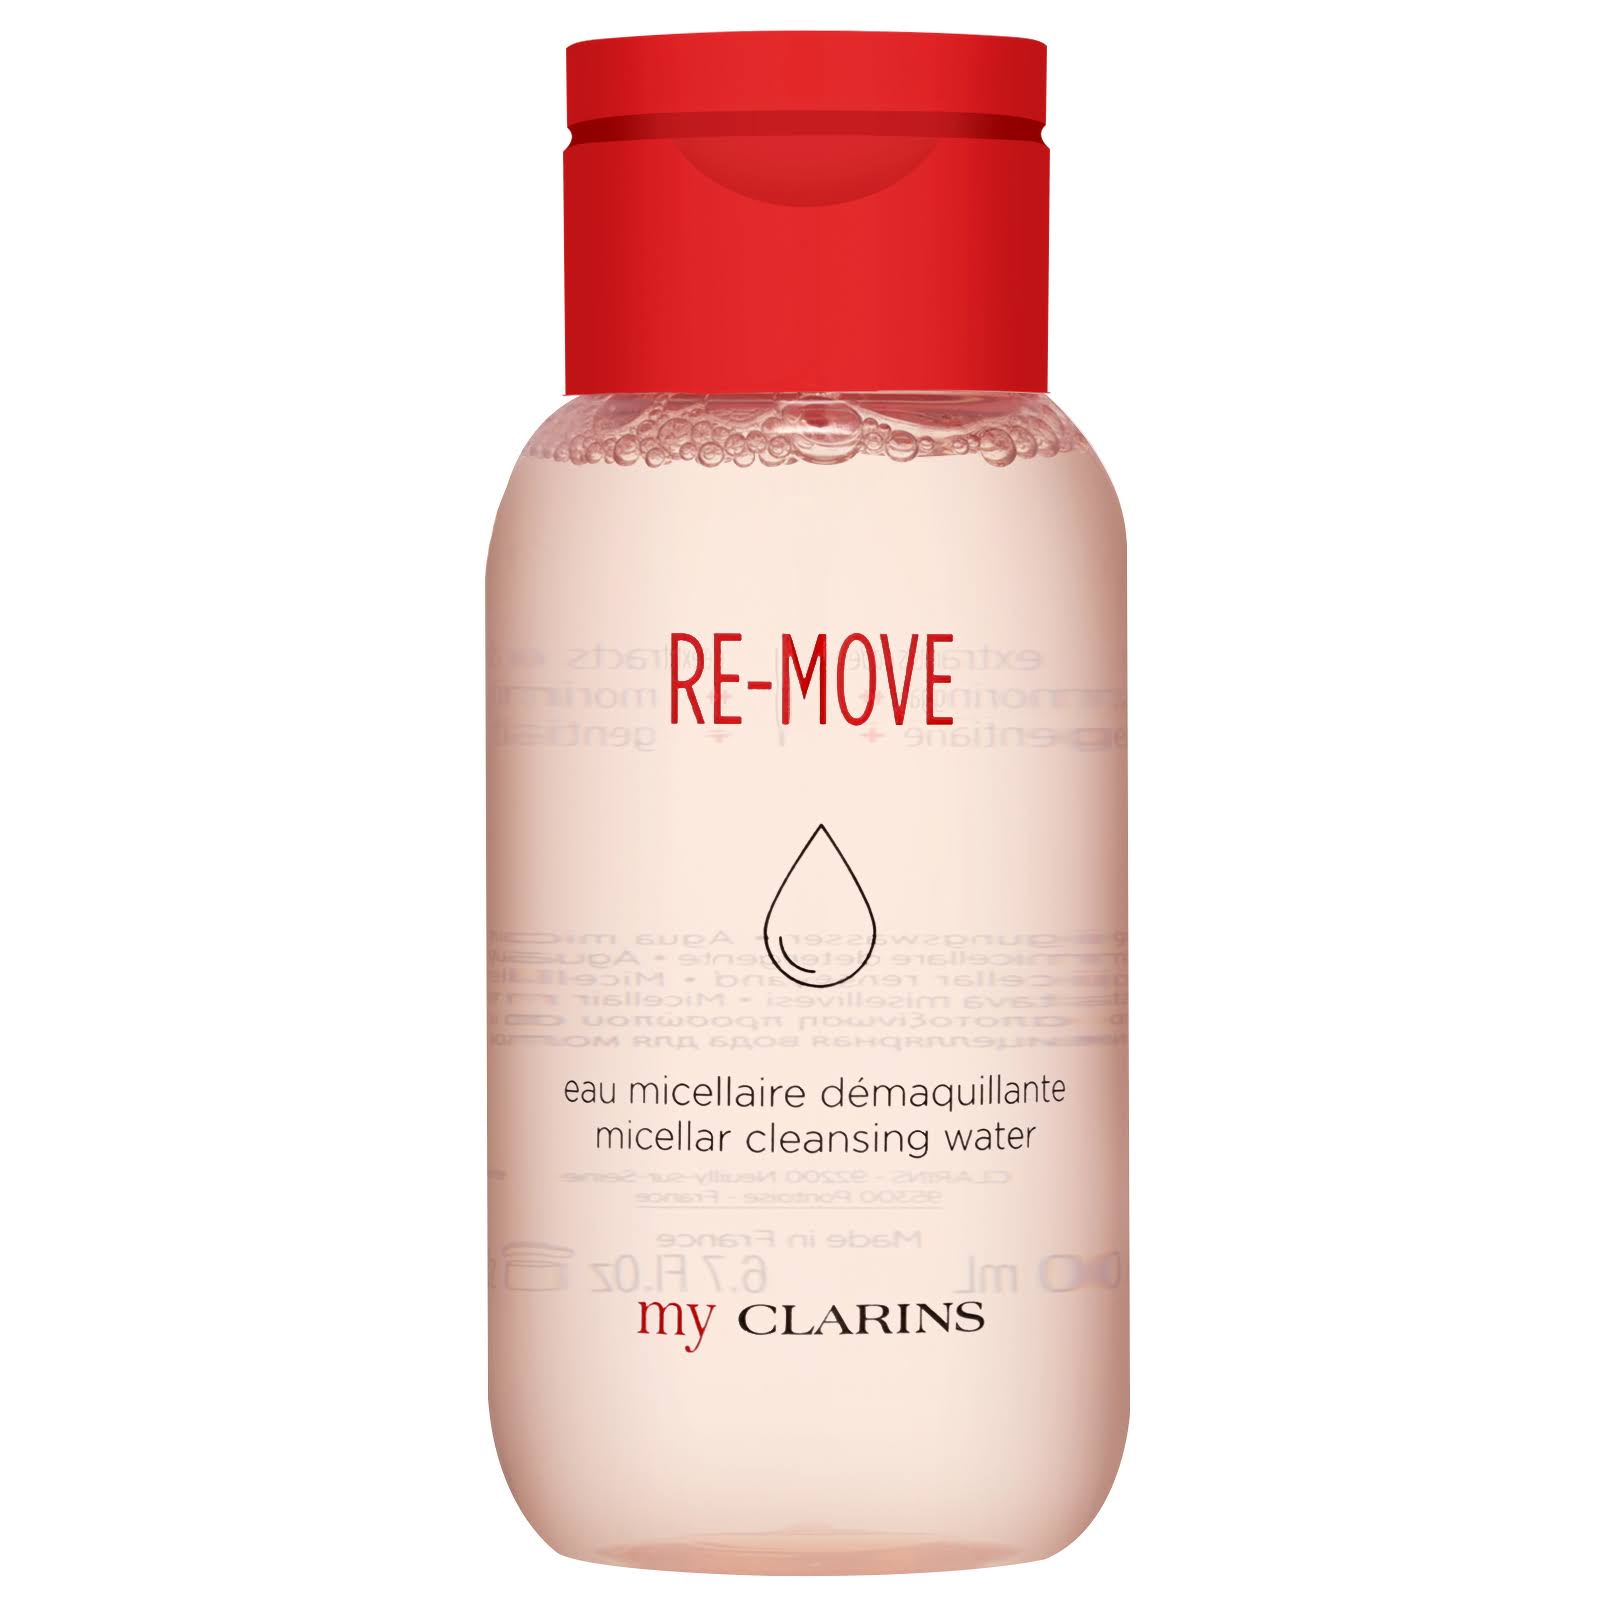 My Clarins RE-MOVE Micellar Cleansing Water 200ml